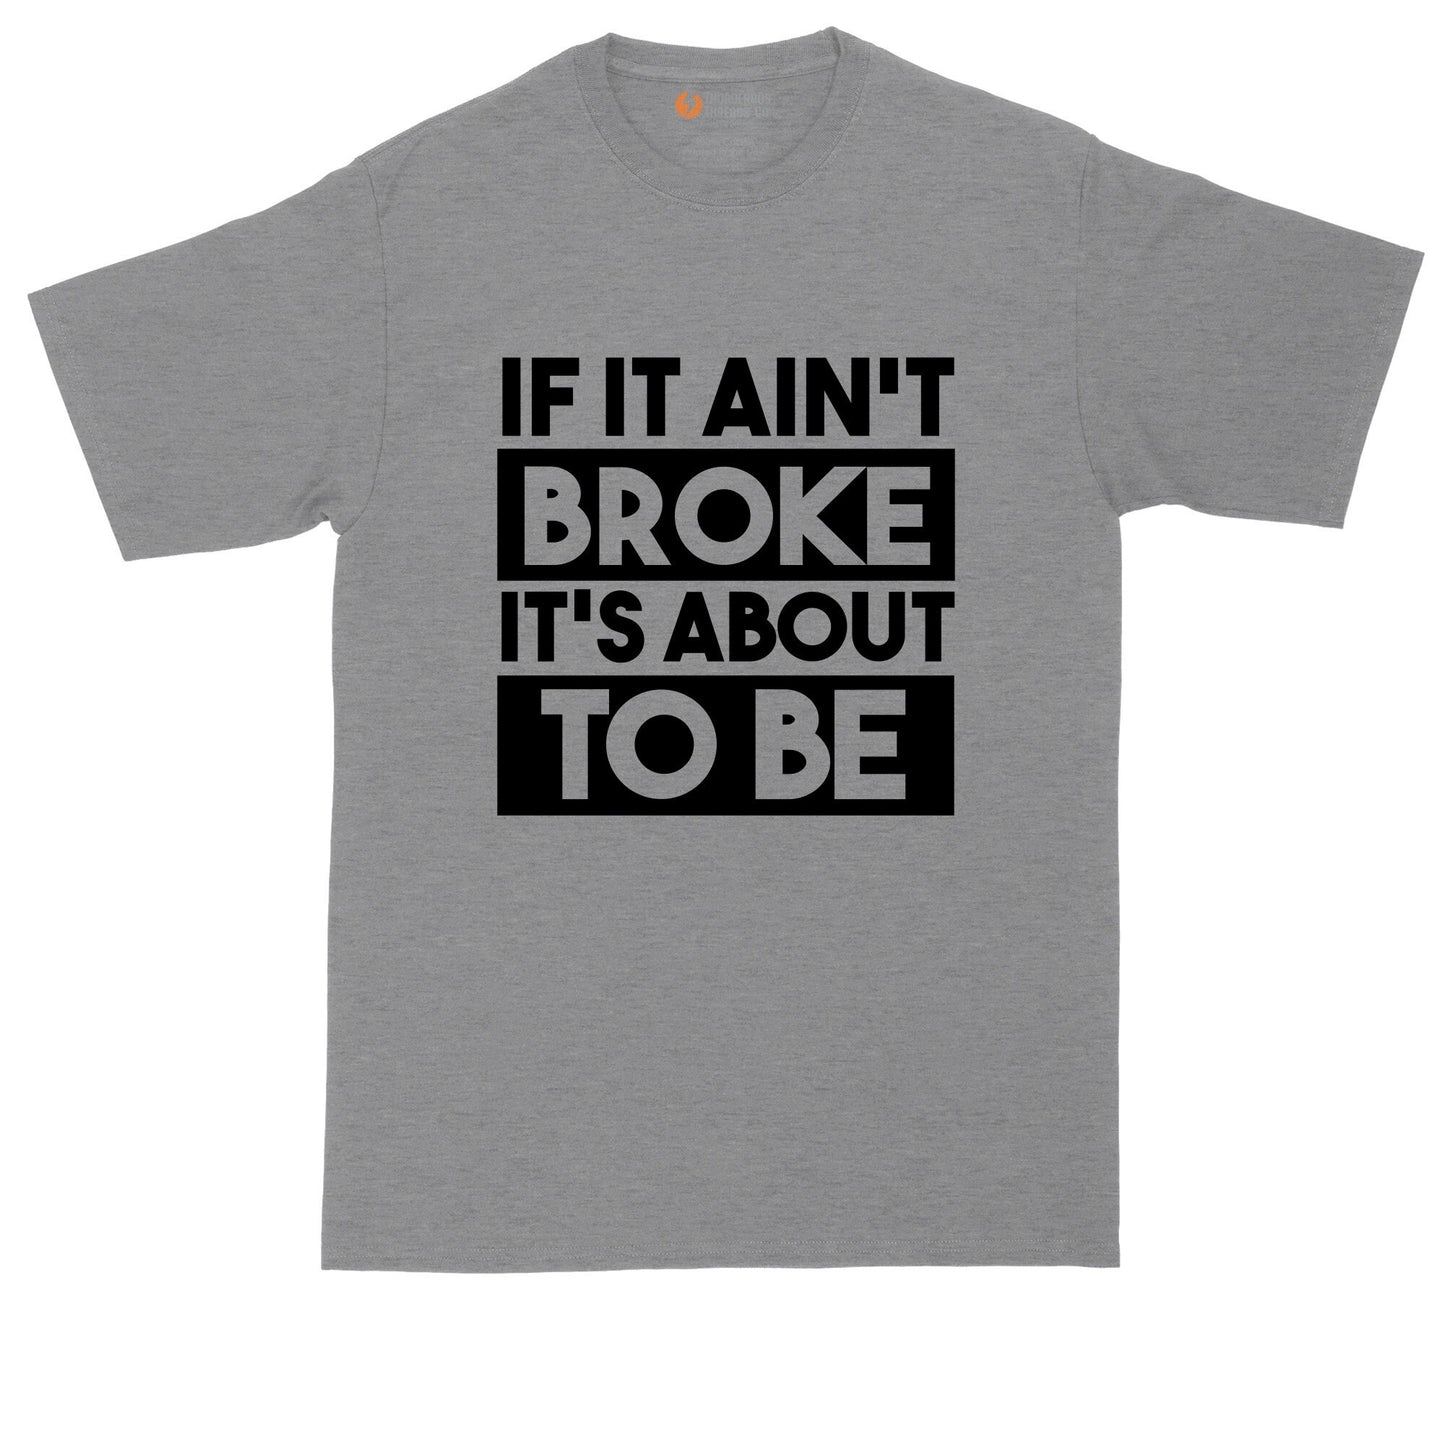 If It Ain't Broke It's About to Be | Big and Tall Mens T-Shirt | Funny T-Shirt | Graphic T-Shirt